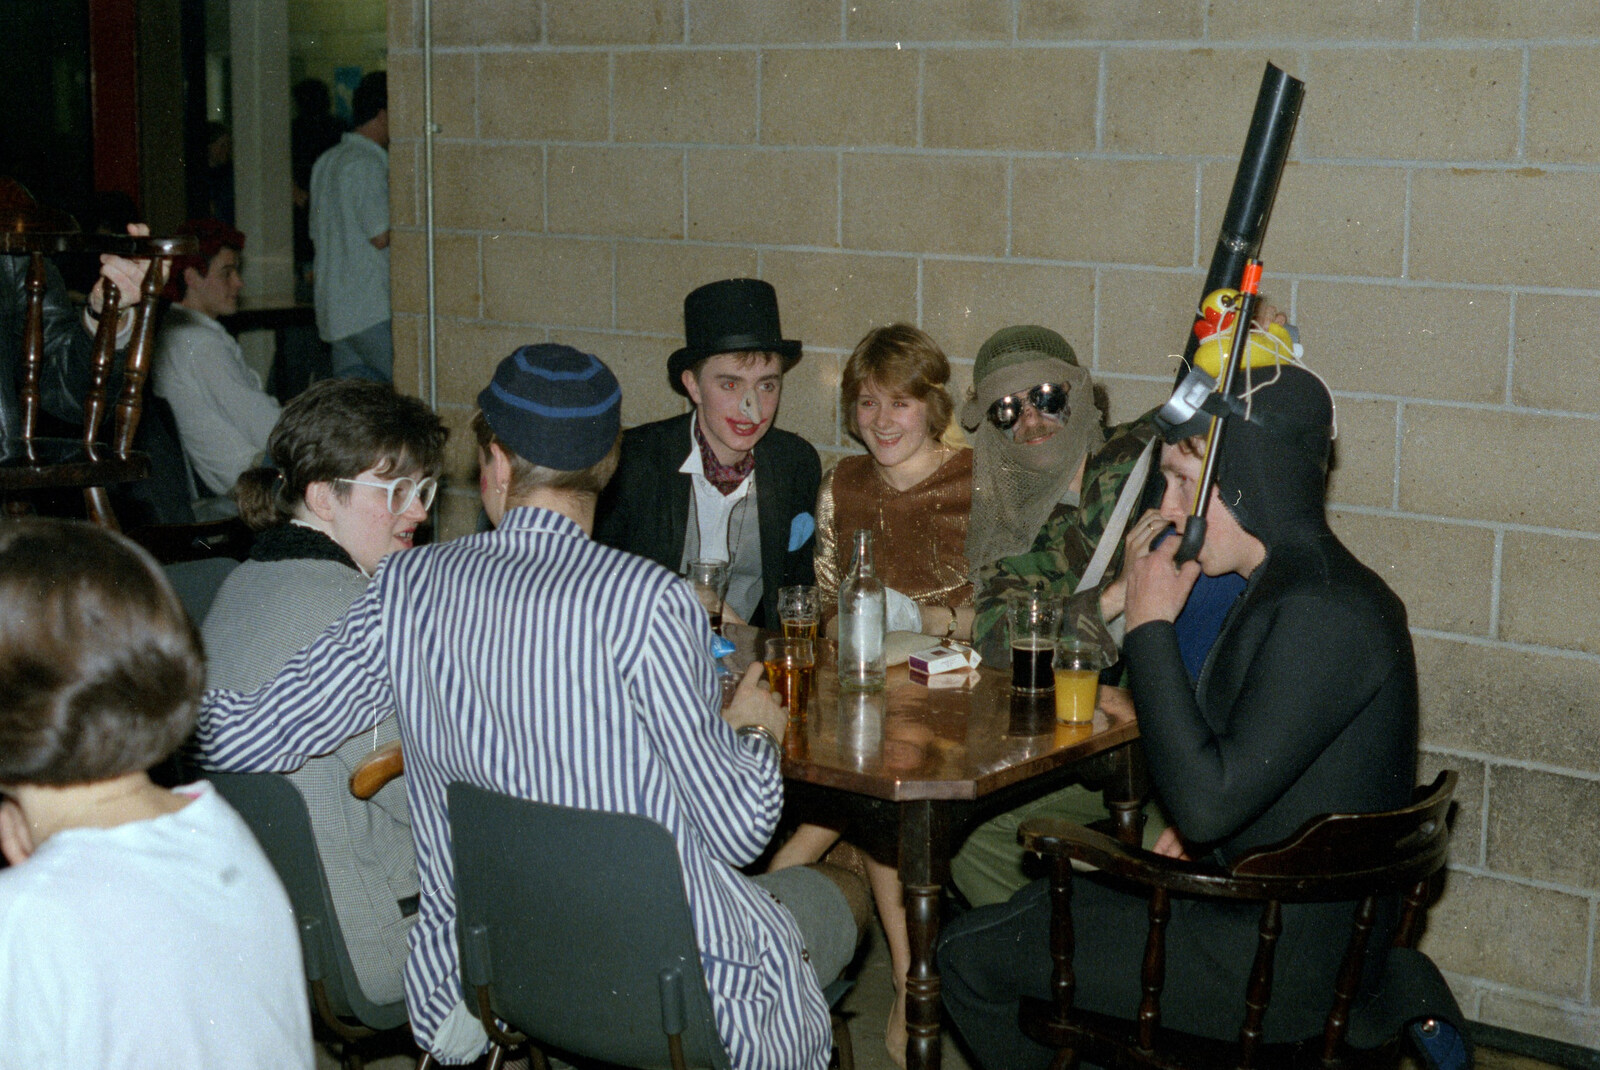 There's a fancy-dress party in the Students' Union from Uni: First Weeks At Polytechnic, Umbrellas and a Visit From Liz, Plymouth - 26th September 1985